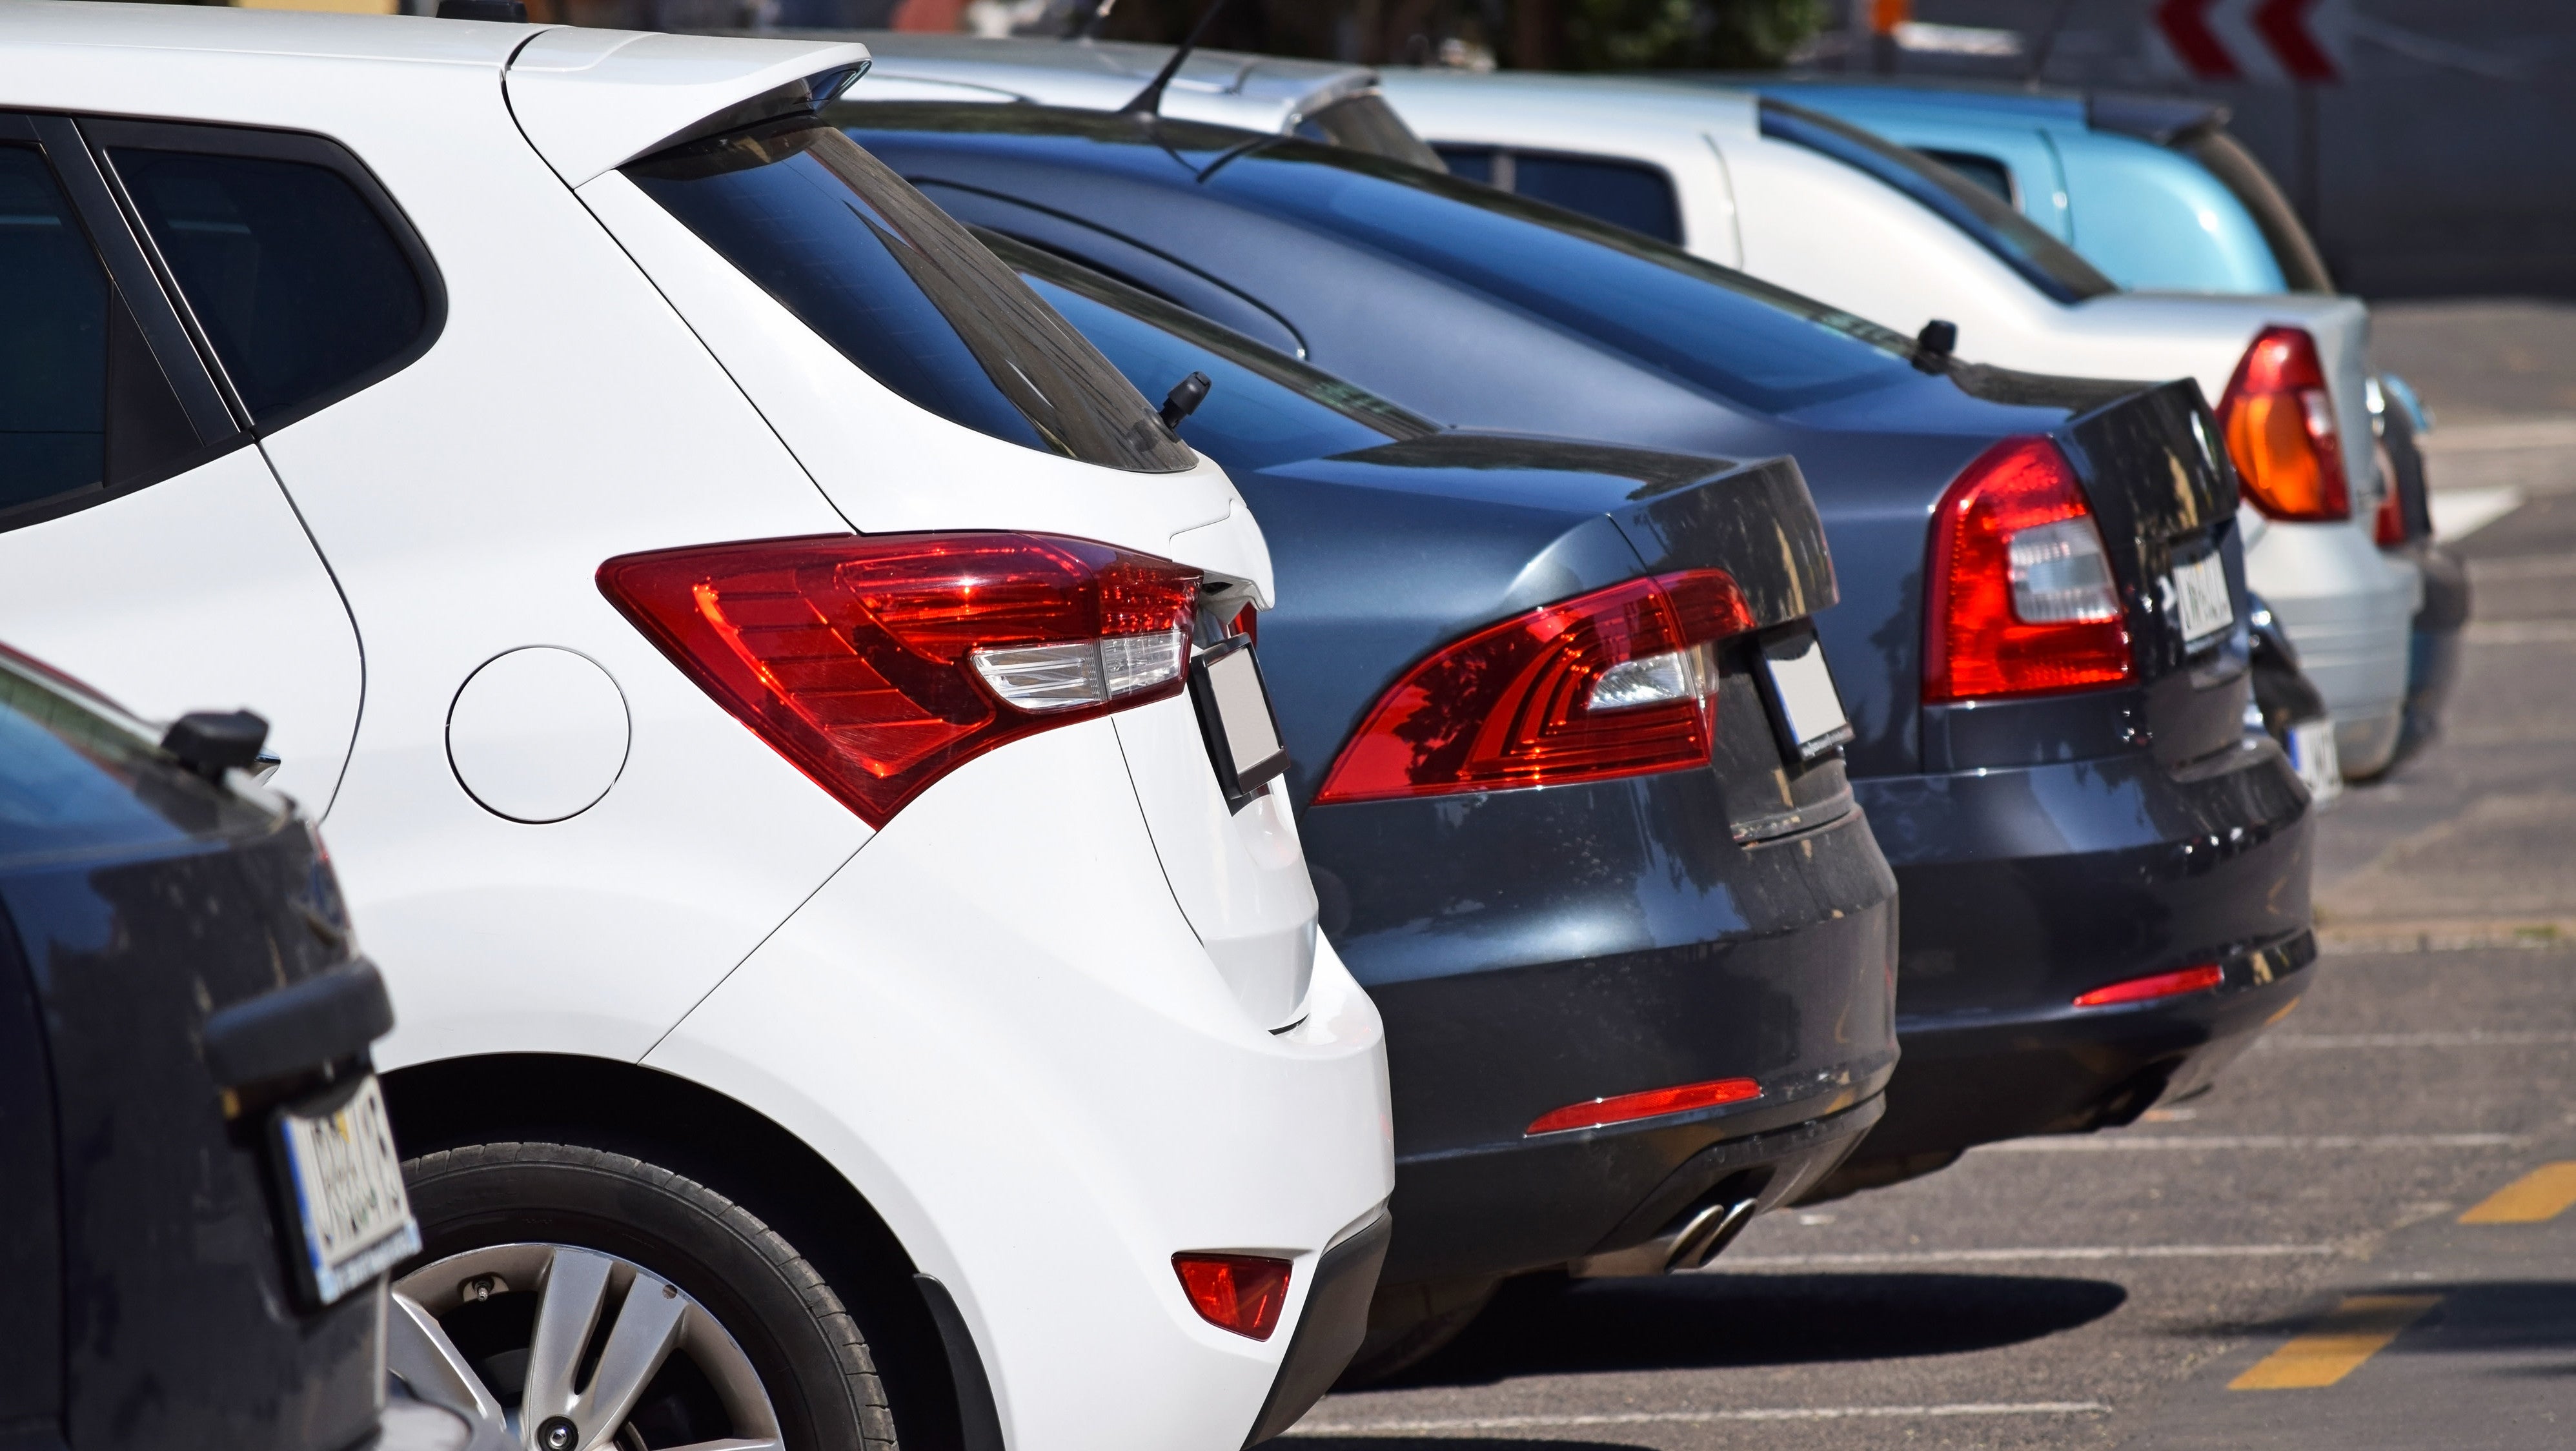 The Best Place To Park Your Car At Shopping Centres, According To Maths